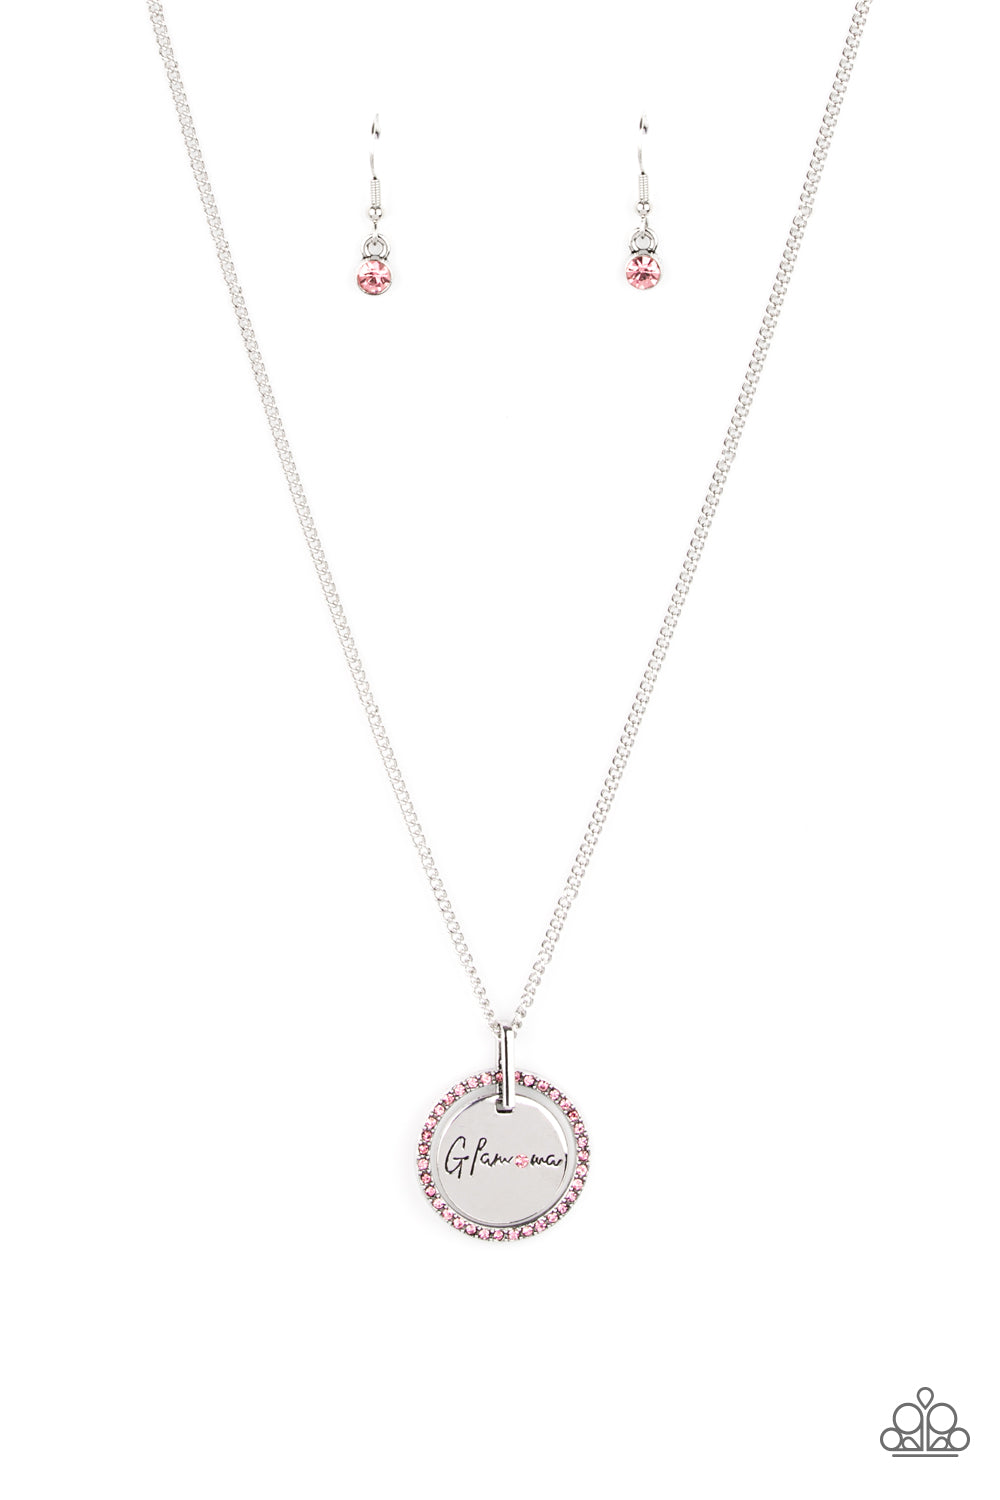 Glam-ma Glamorous Paparazzi Accessories Necklace with Earrings - Pink